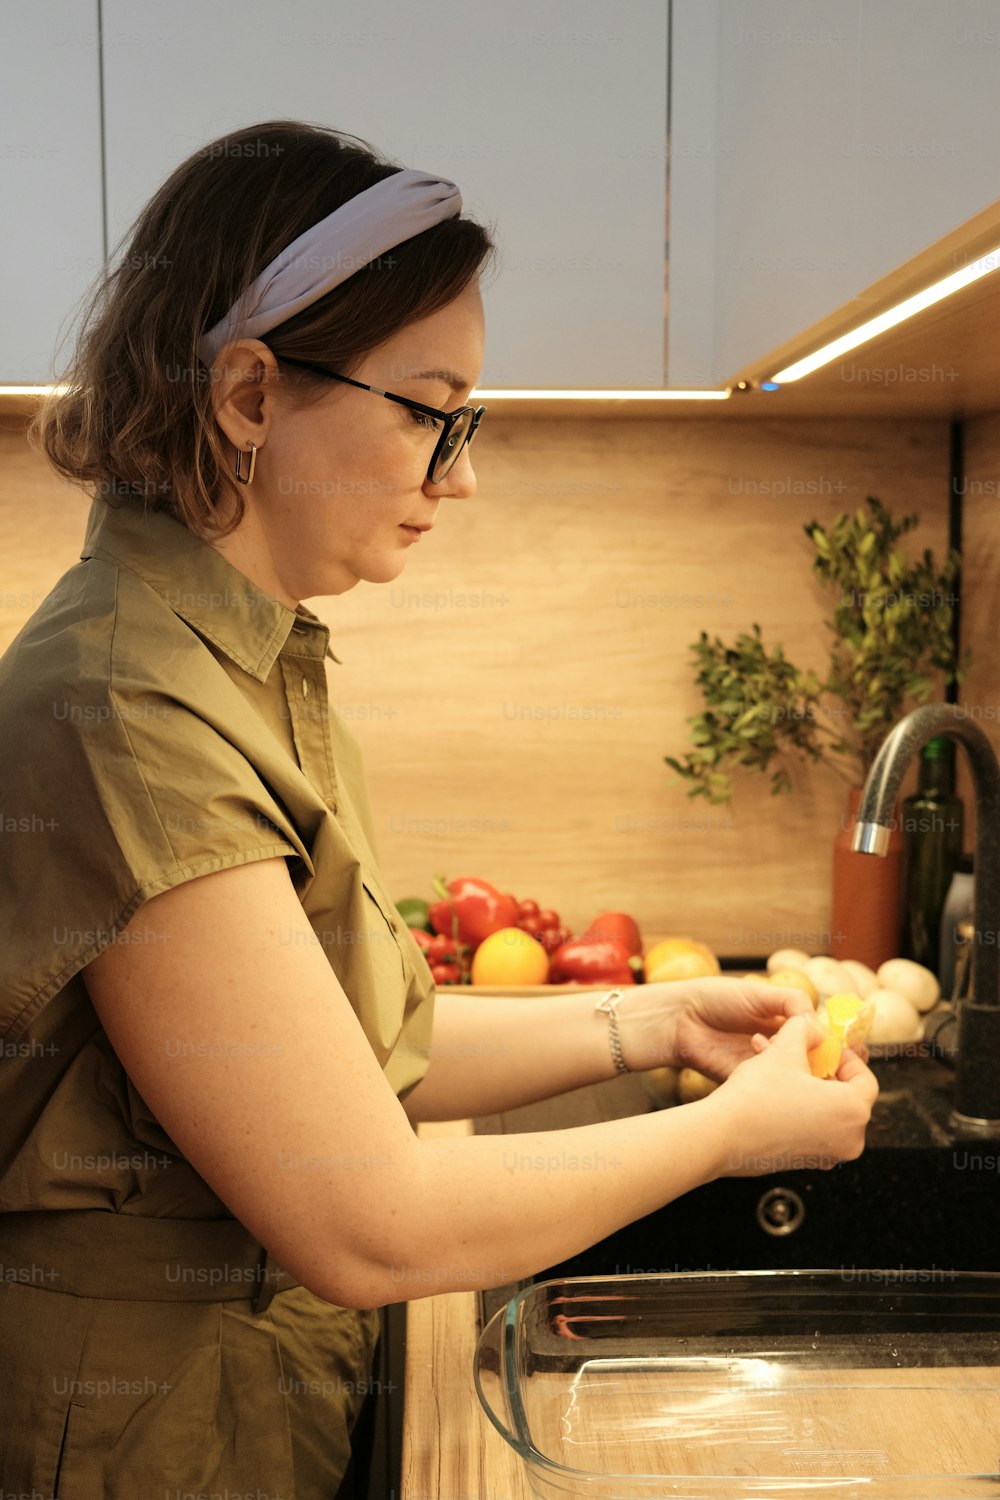 a woman in a kitchen preparing food on a counter